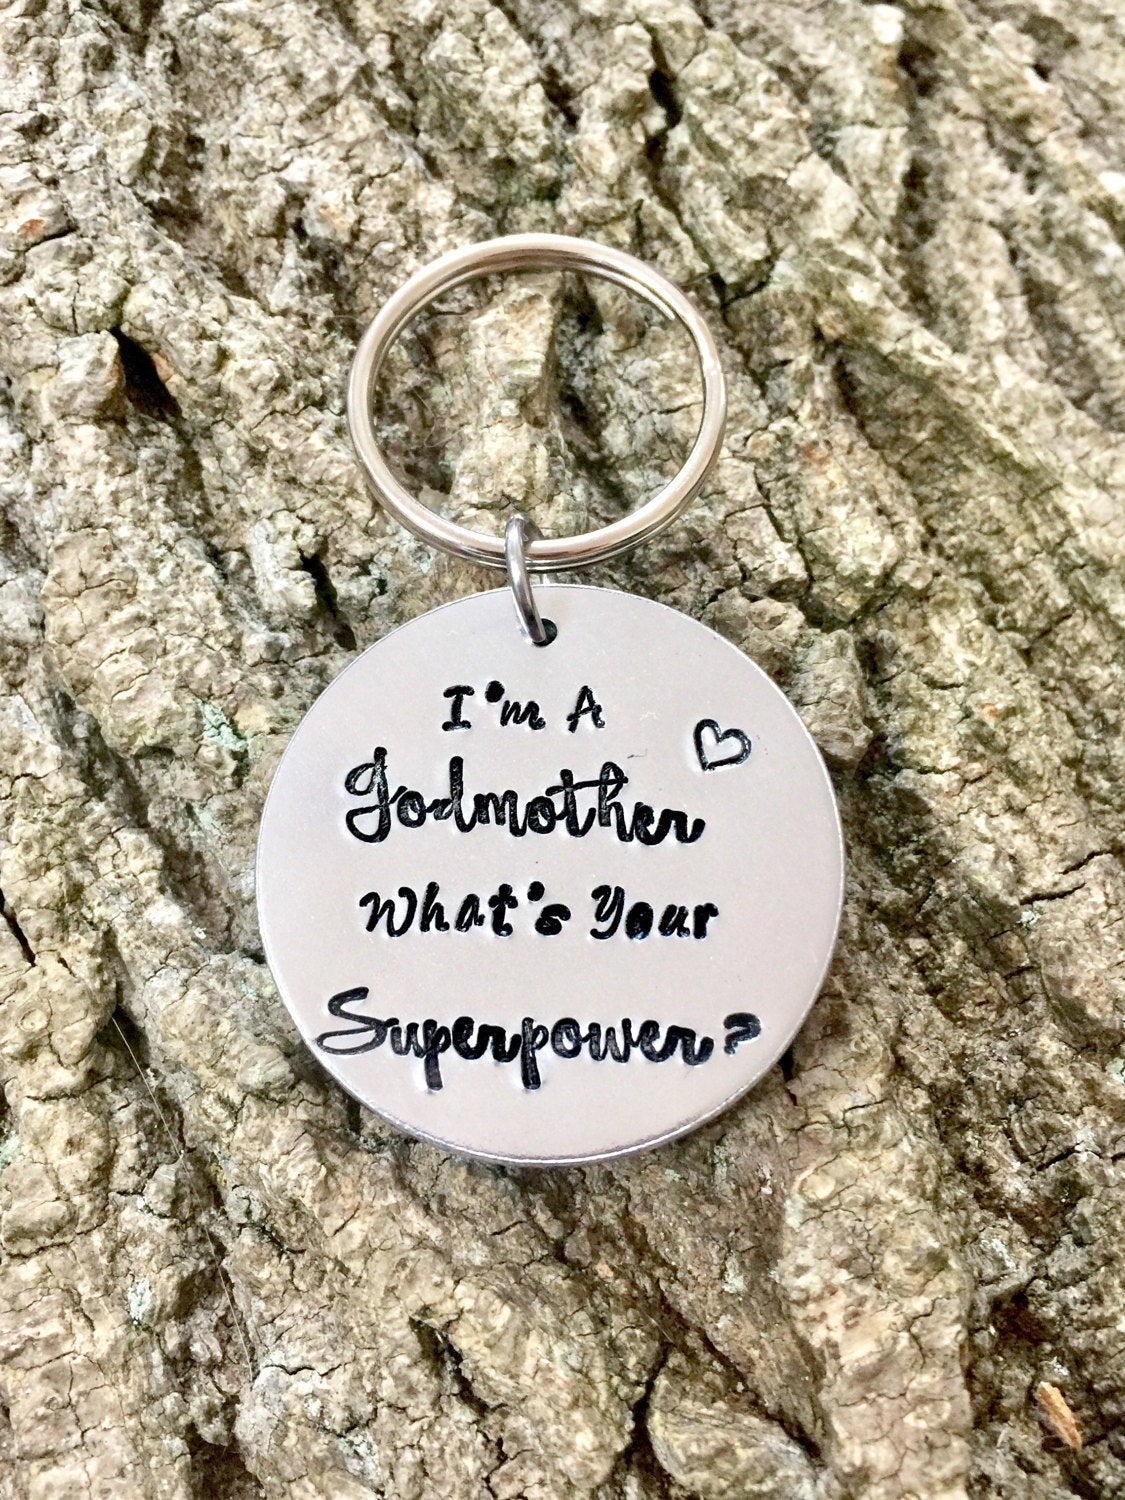 I'm a Godmother whats your superpower?, godmother gift, christening gift, godparent gift, god mother gift, godparent, gift for god mother